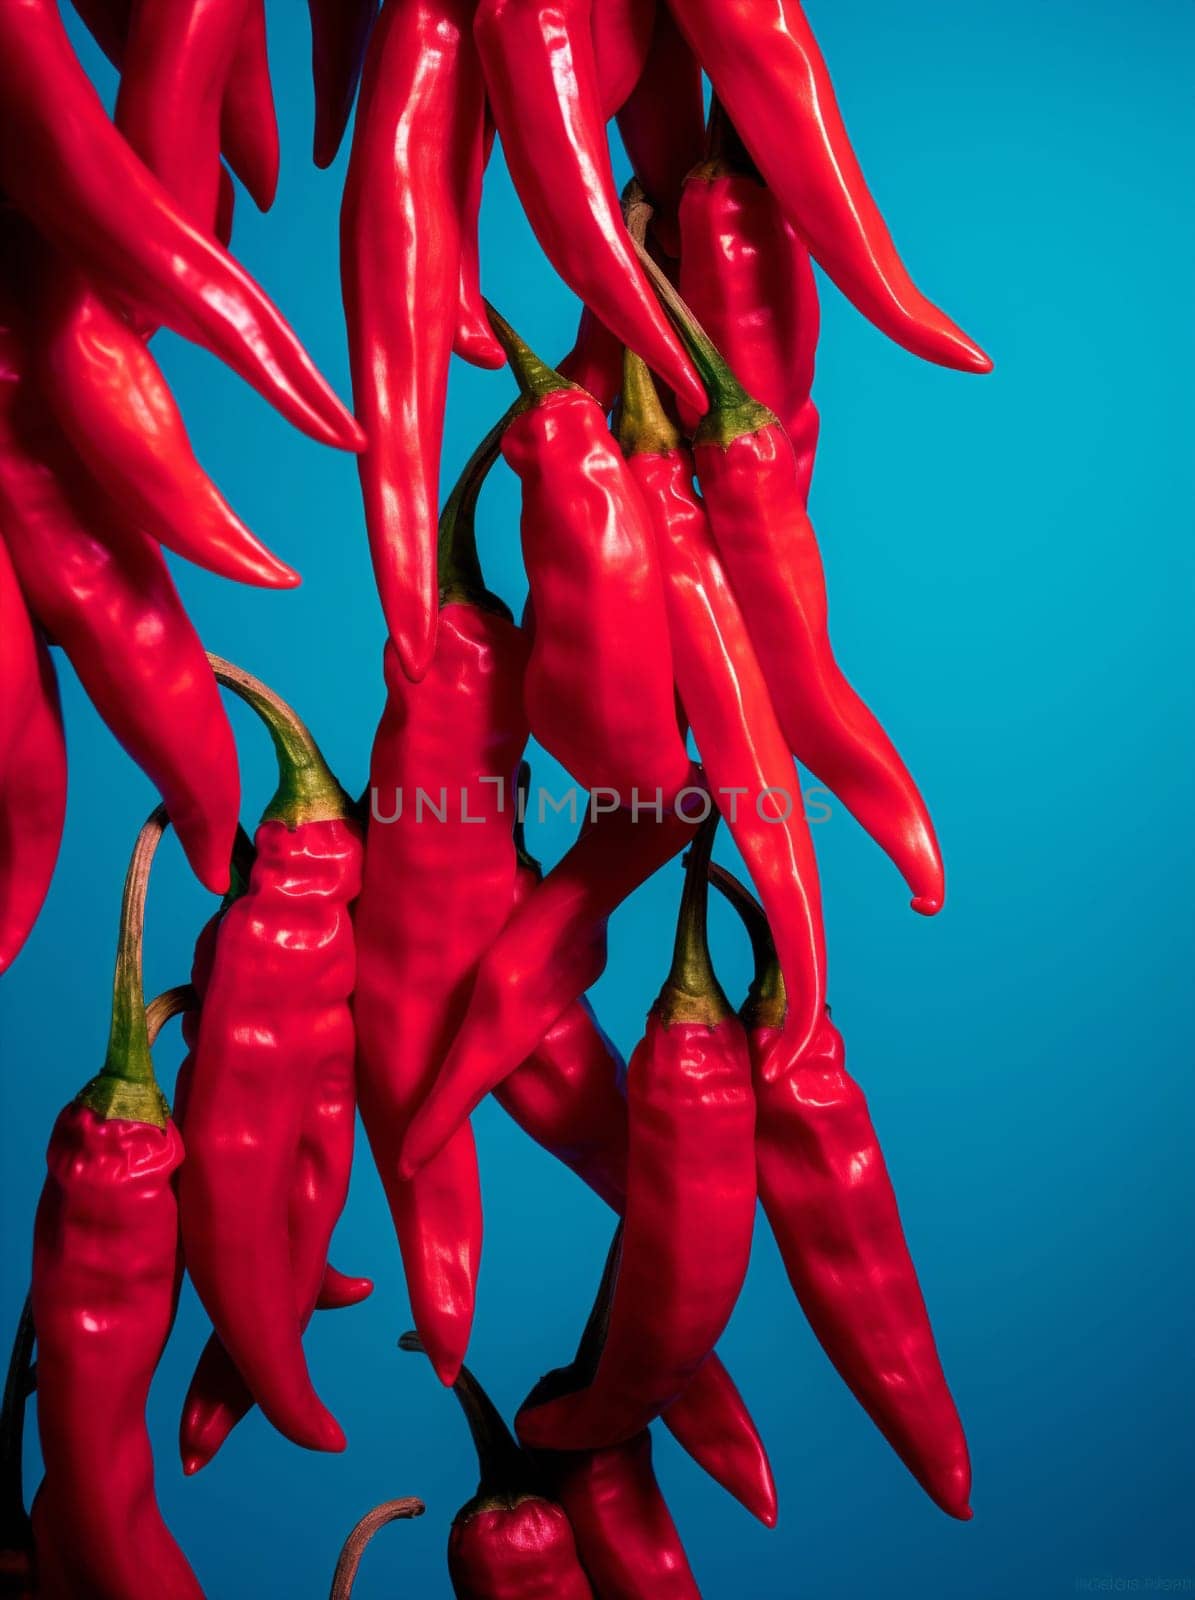 Spicy chilly healthy vegetable fresh food paprika hot colorful mexican peppers raw spice chili seasoning cook red ripe fire vegetarian organic background ingredient